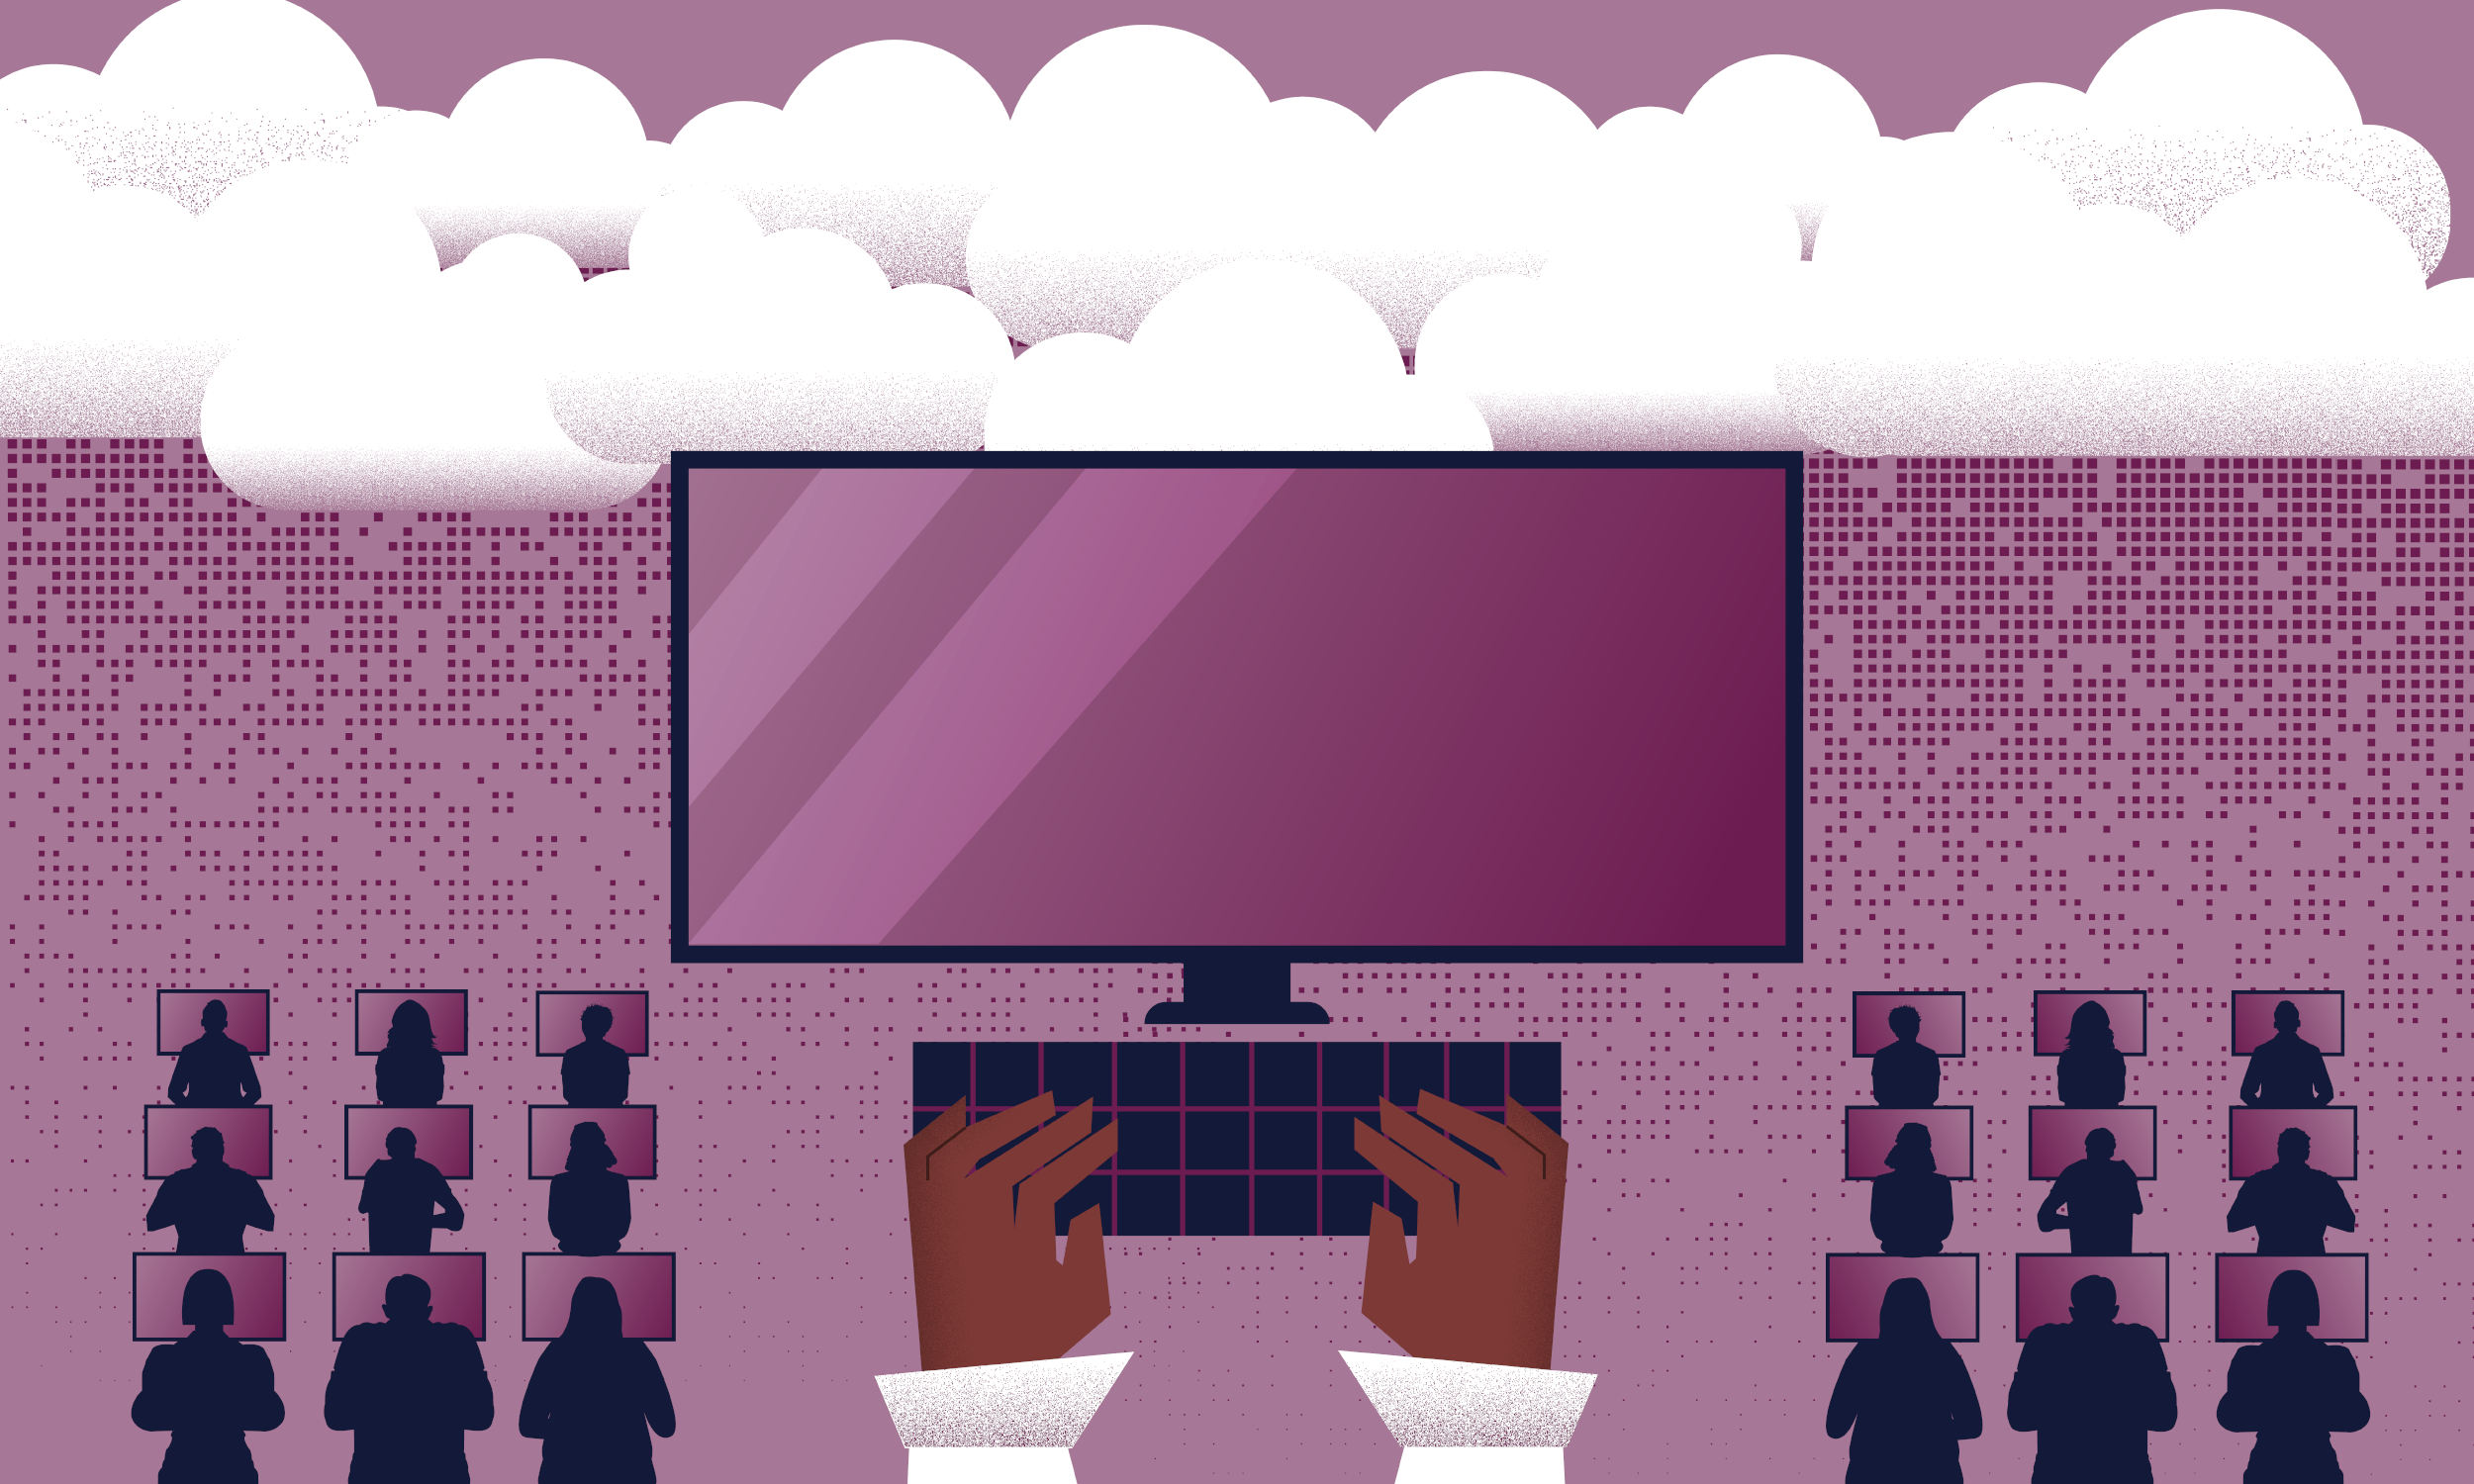 Graphic of large hands on a computer keyboard with a wide screen with 18 silhouettes of people working on computers to the left and right and clouds on top